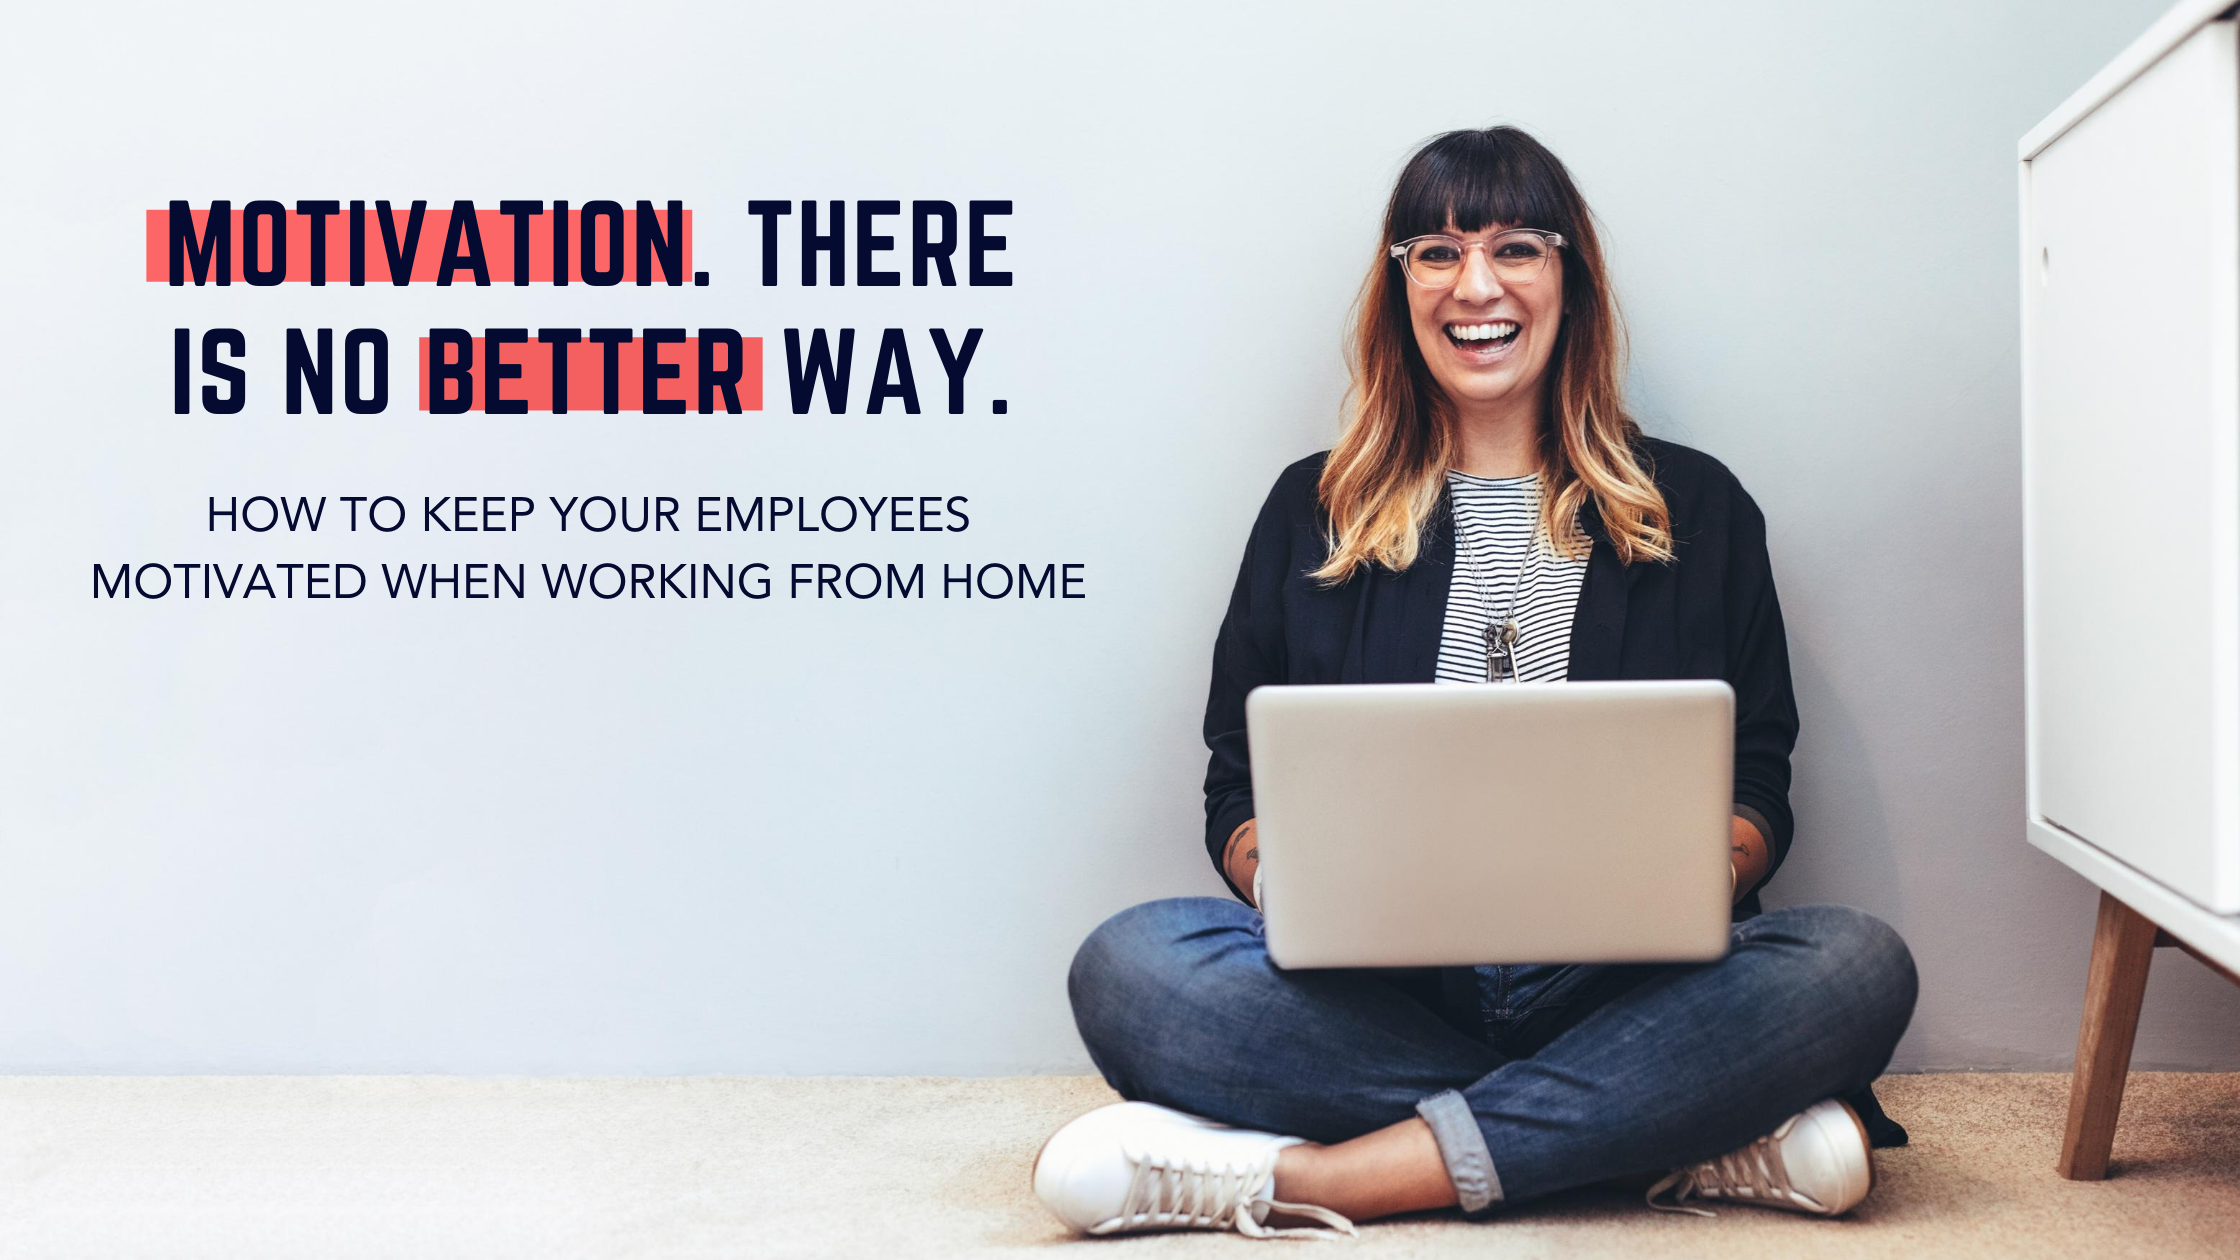 How to Keep Employees Motivated at Home